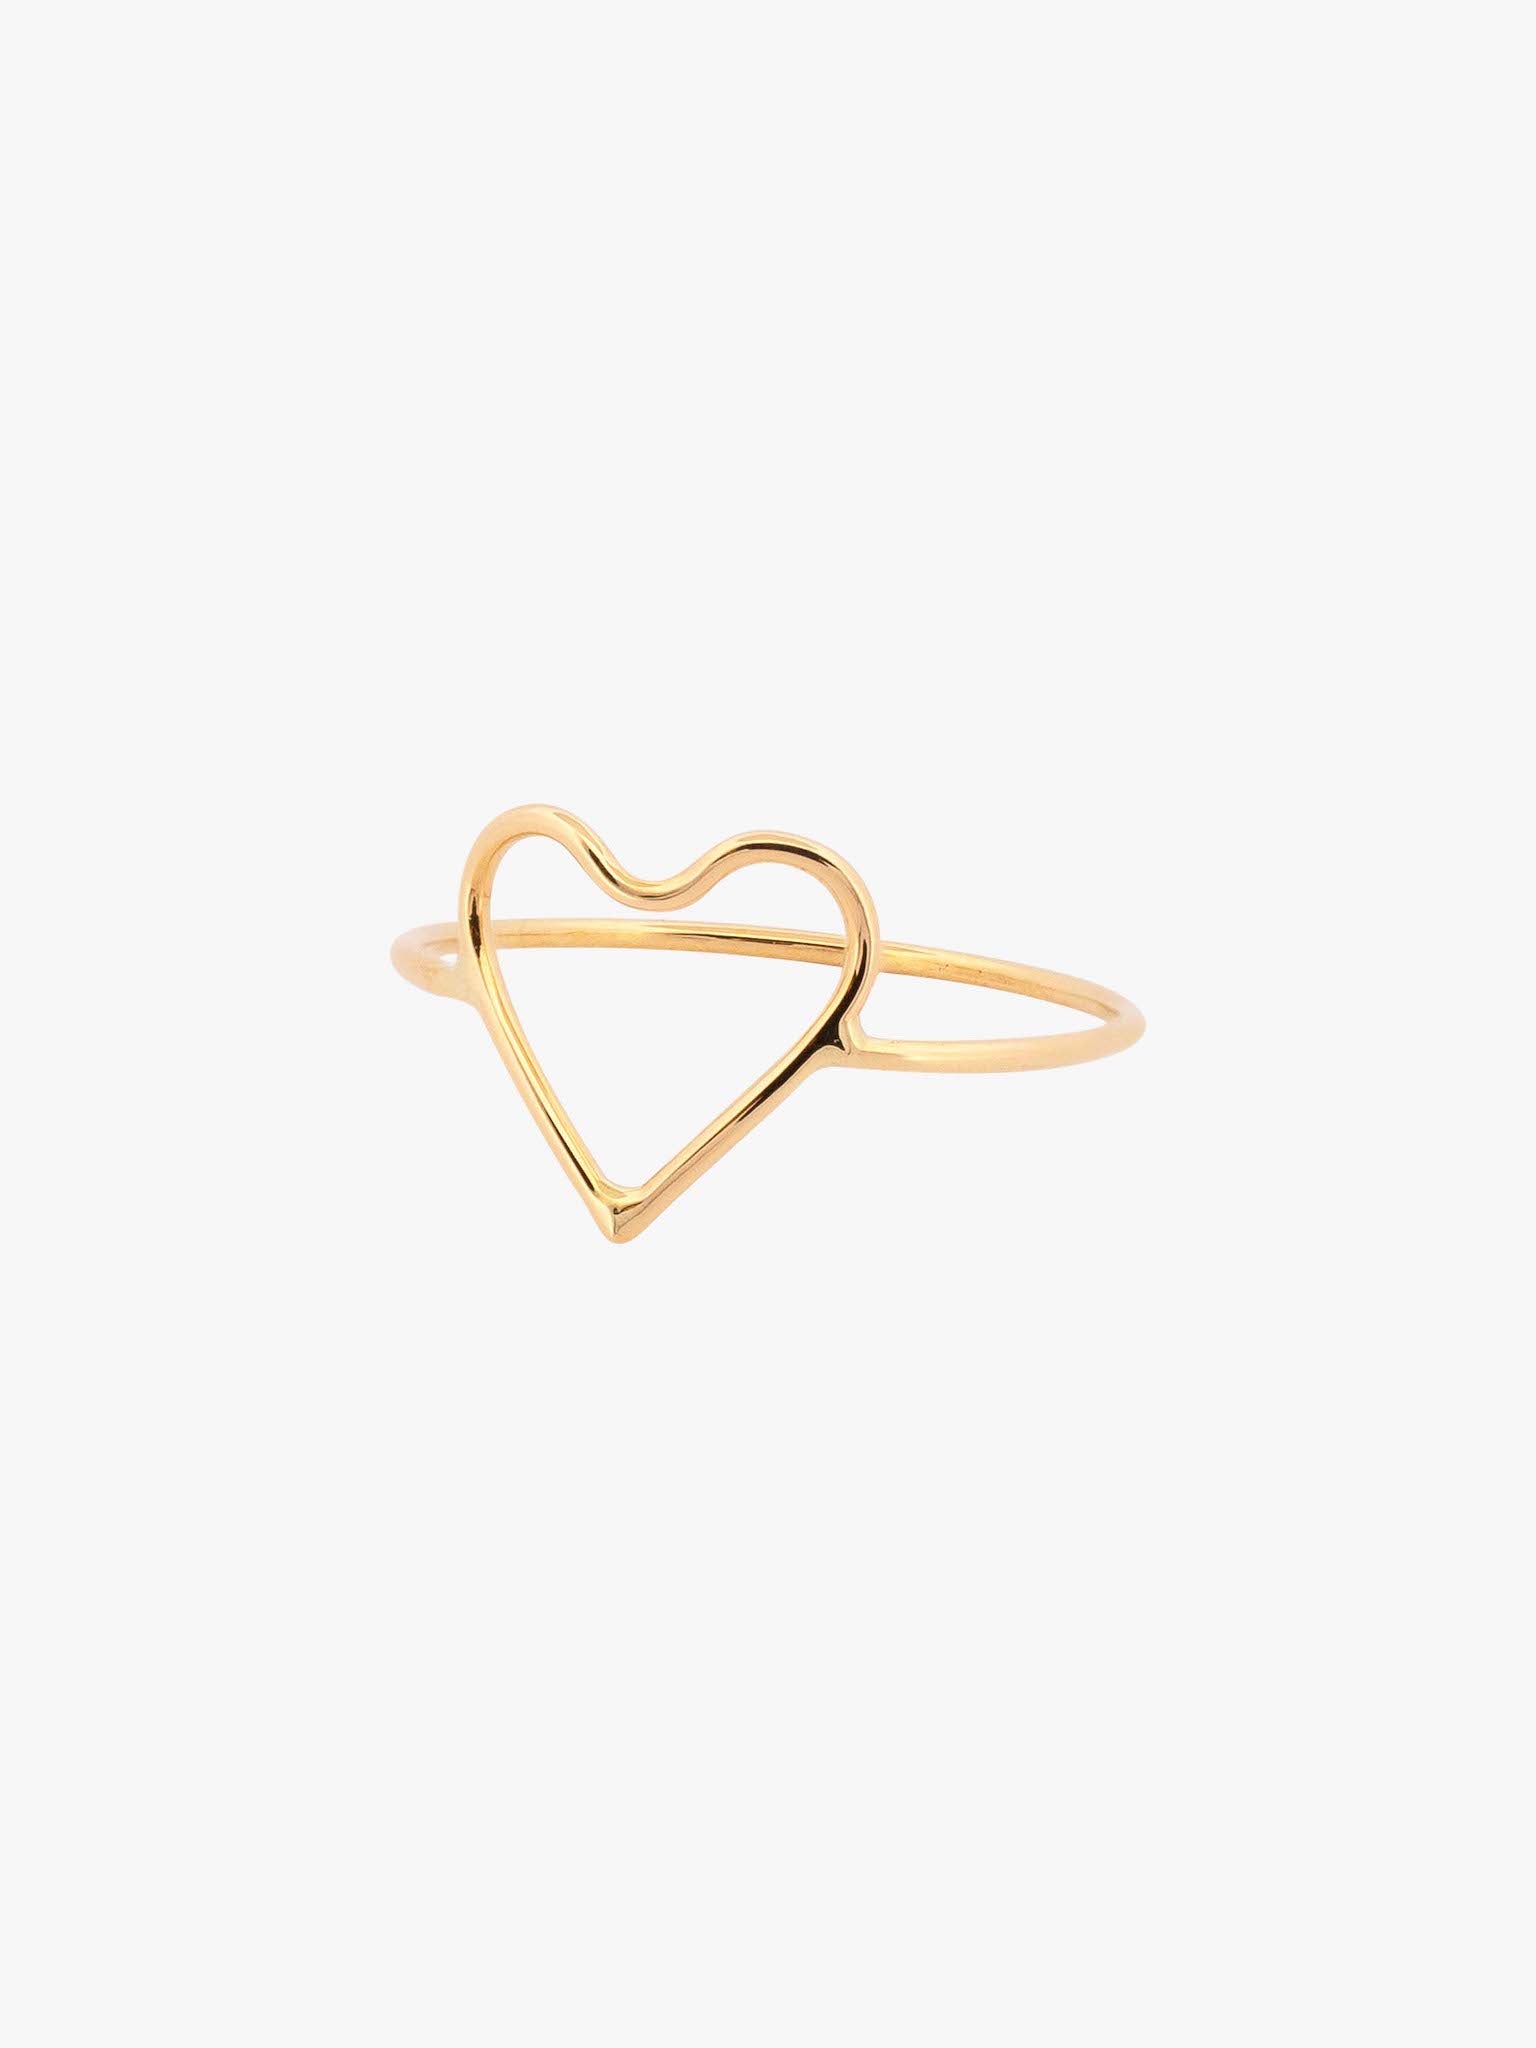 Silhouette heart ring